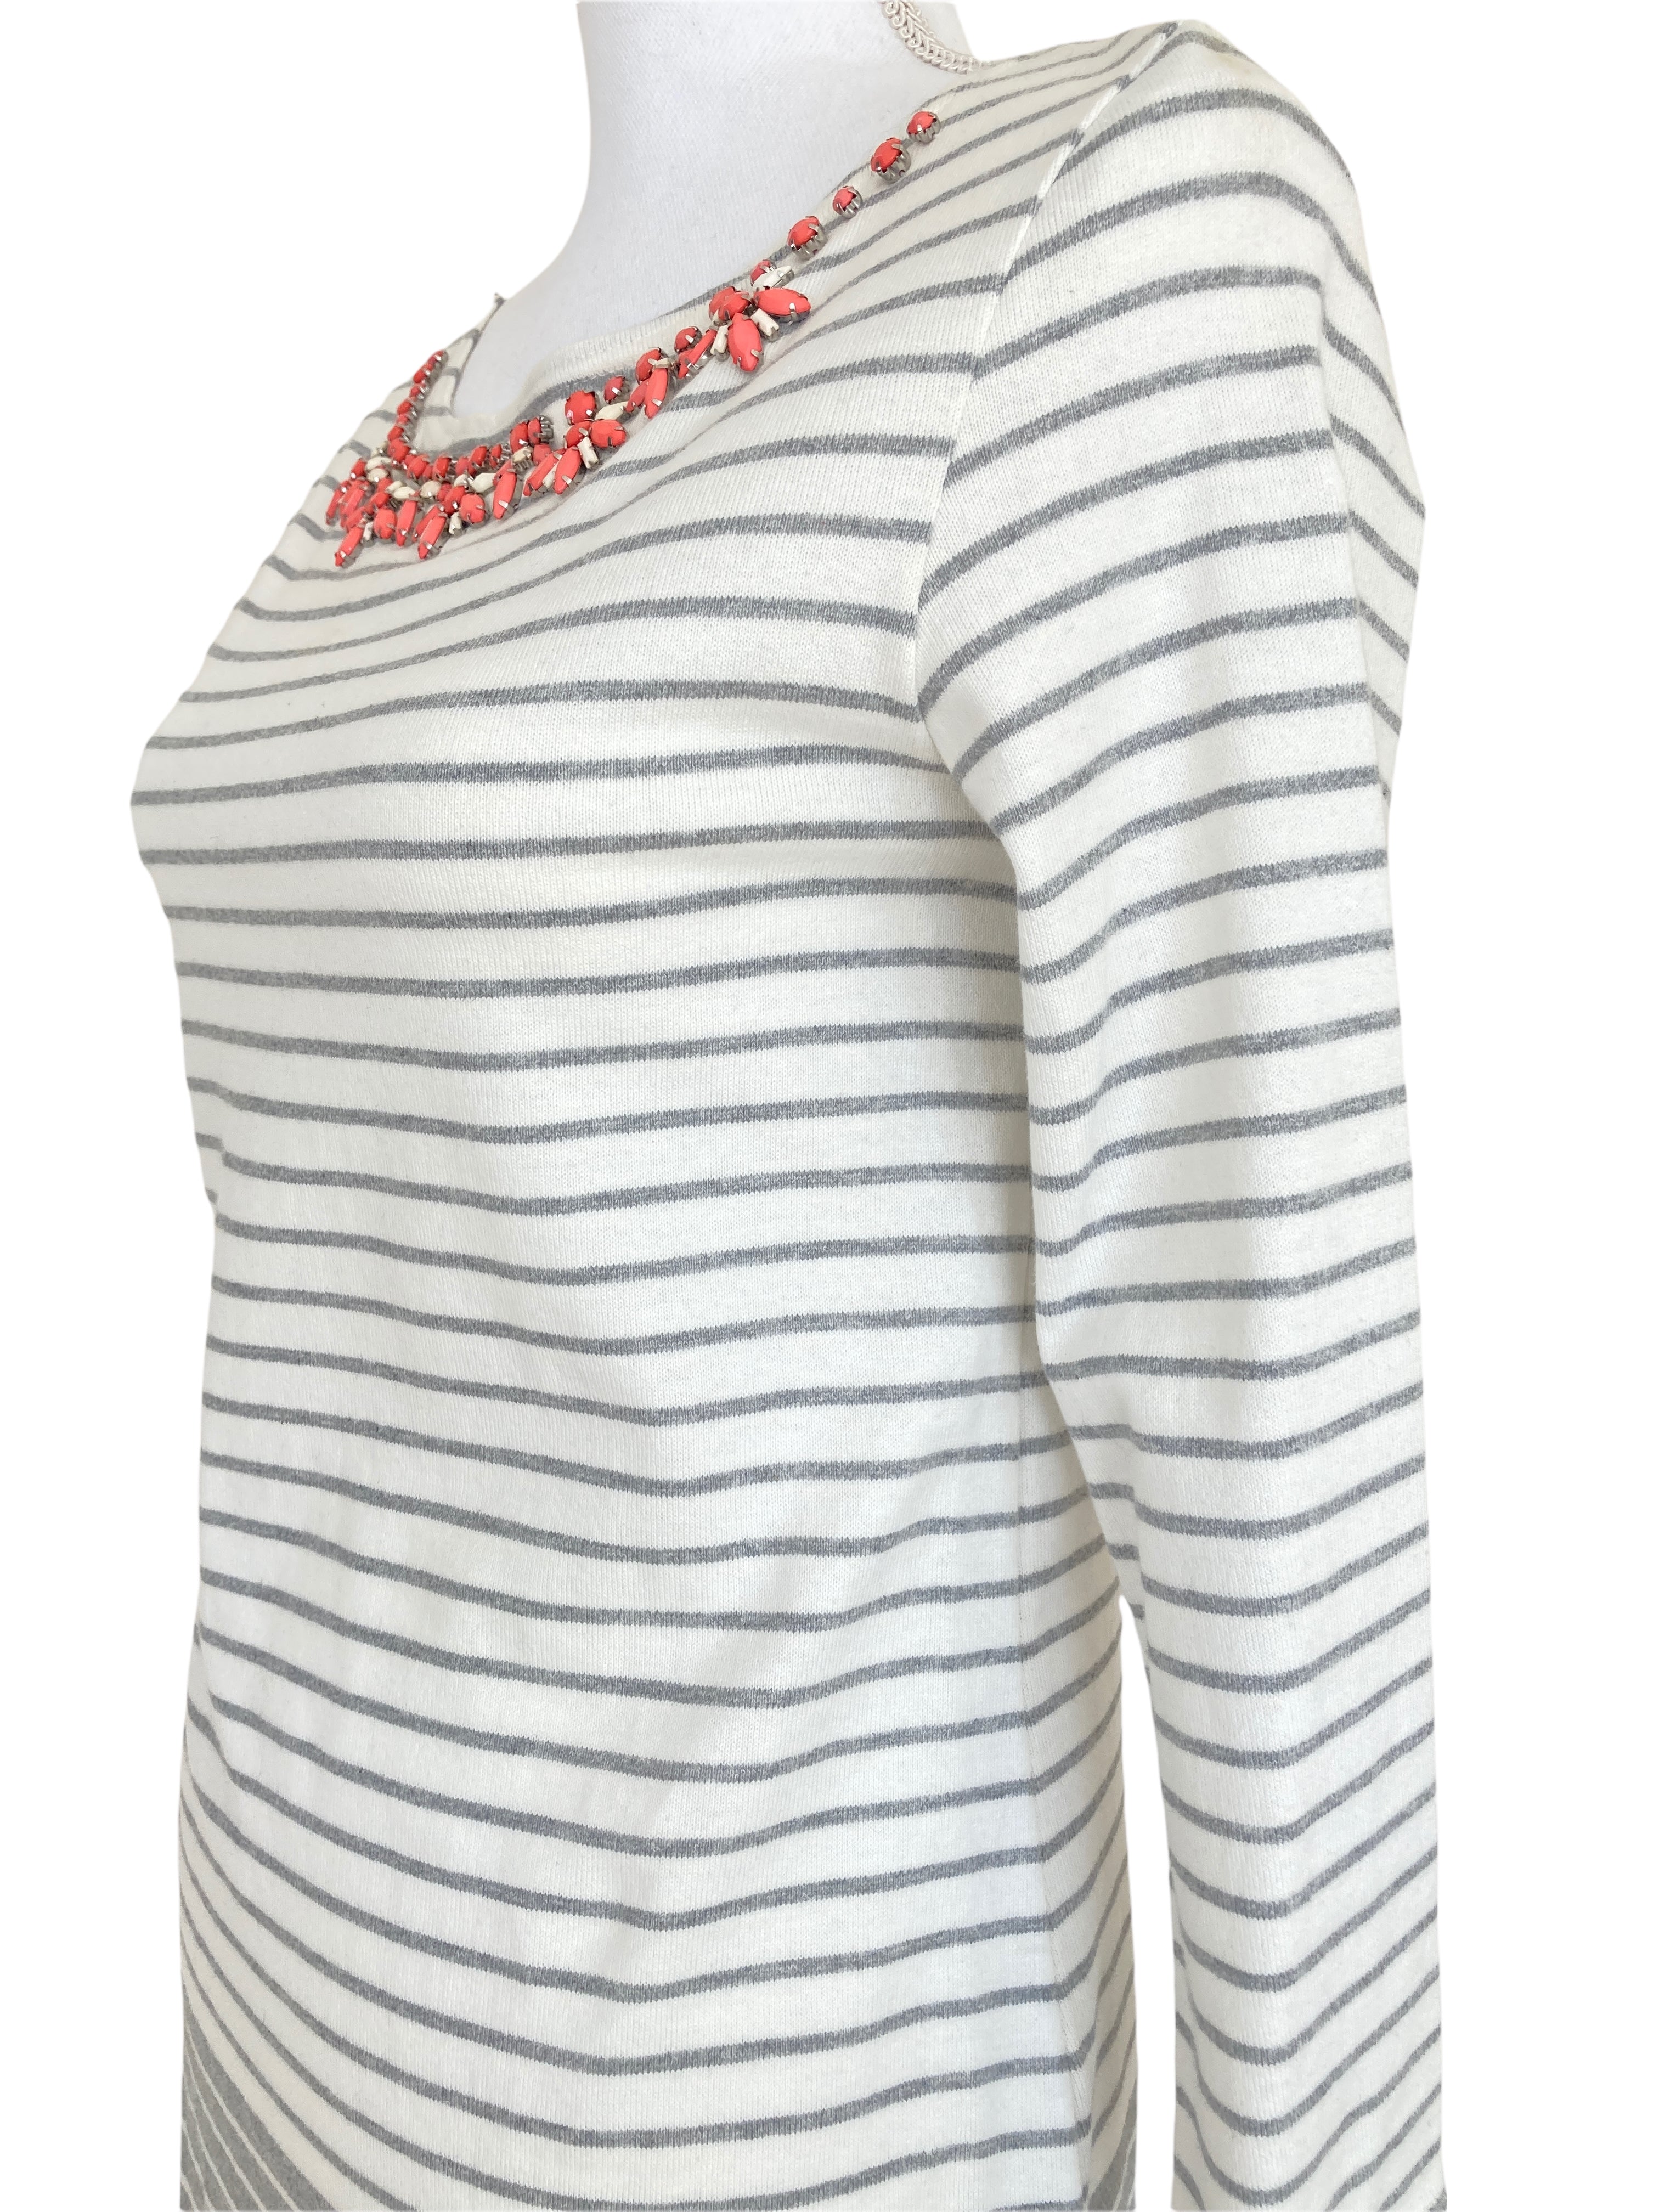 Joules Grey and Ivory Striped Dress, 6